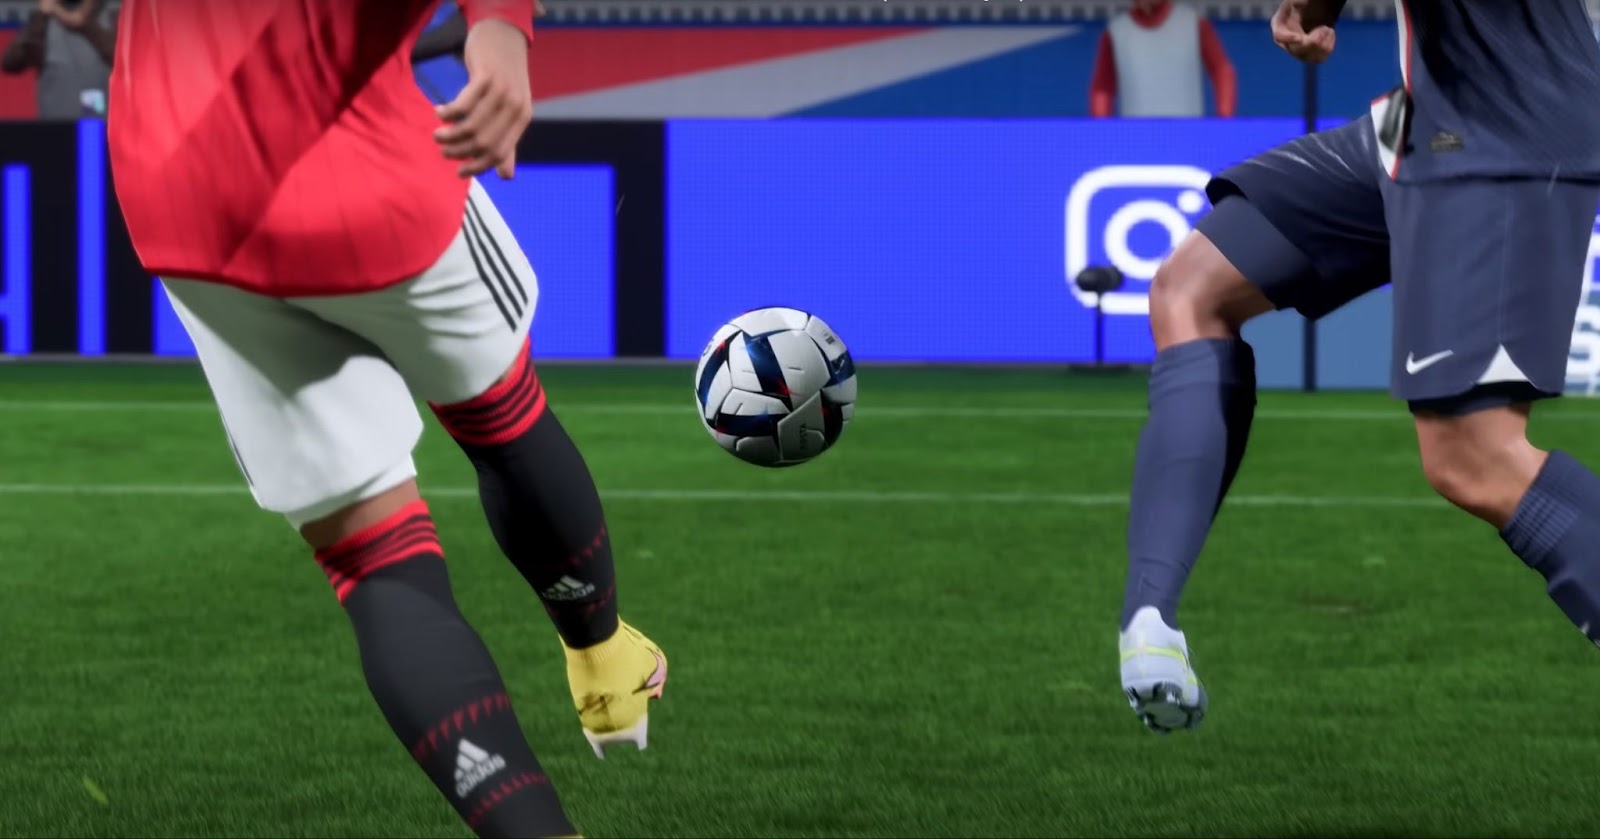 Why Is FIFA 23 Not On Sale Yet?